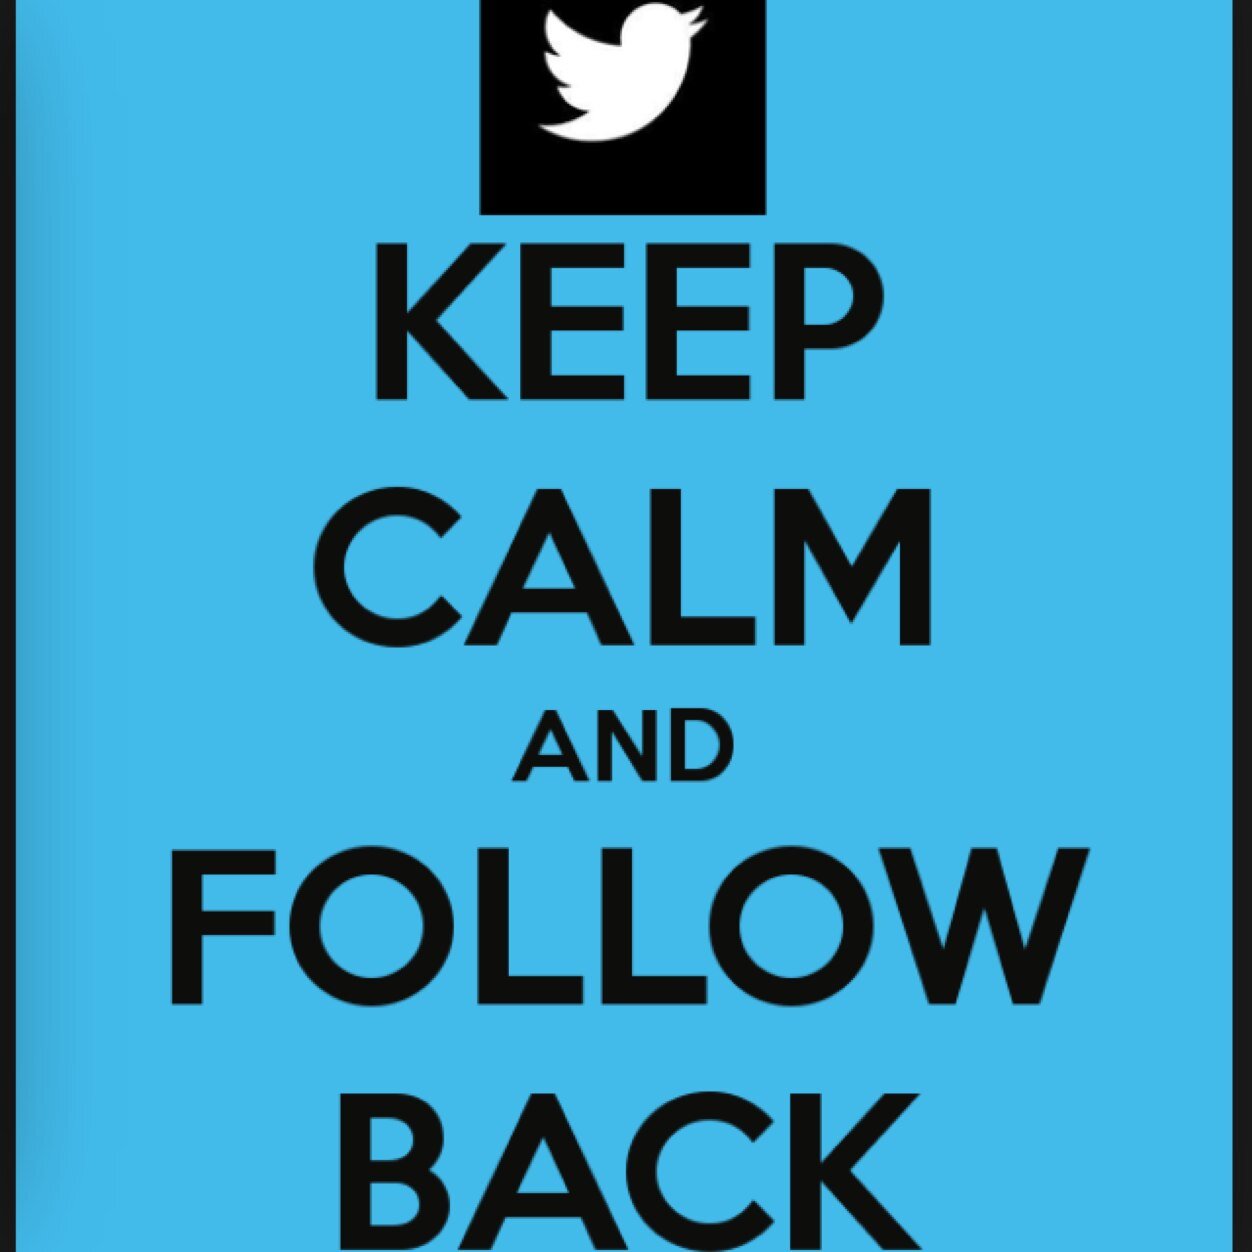 Official follow back page of twitter...so, well you know...FOLLOW BACK!!!